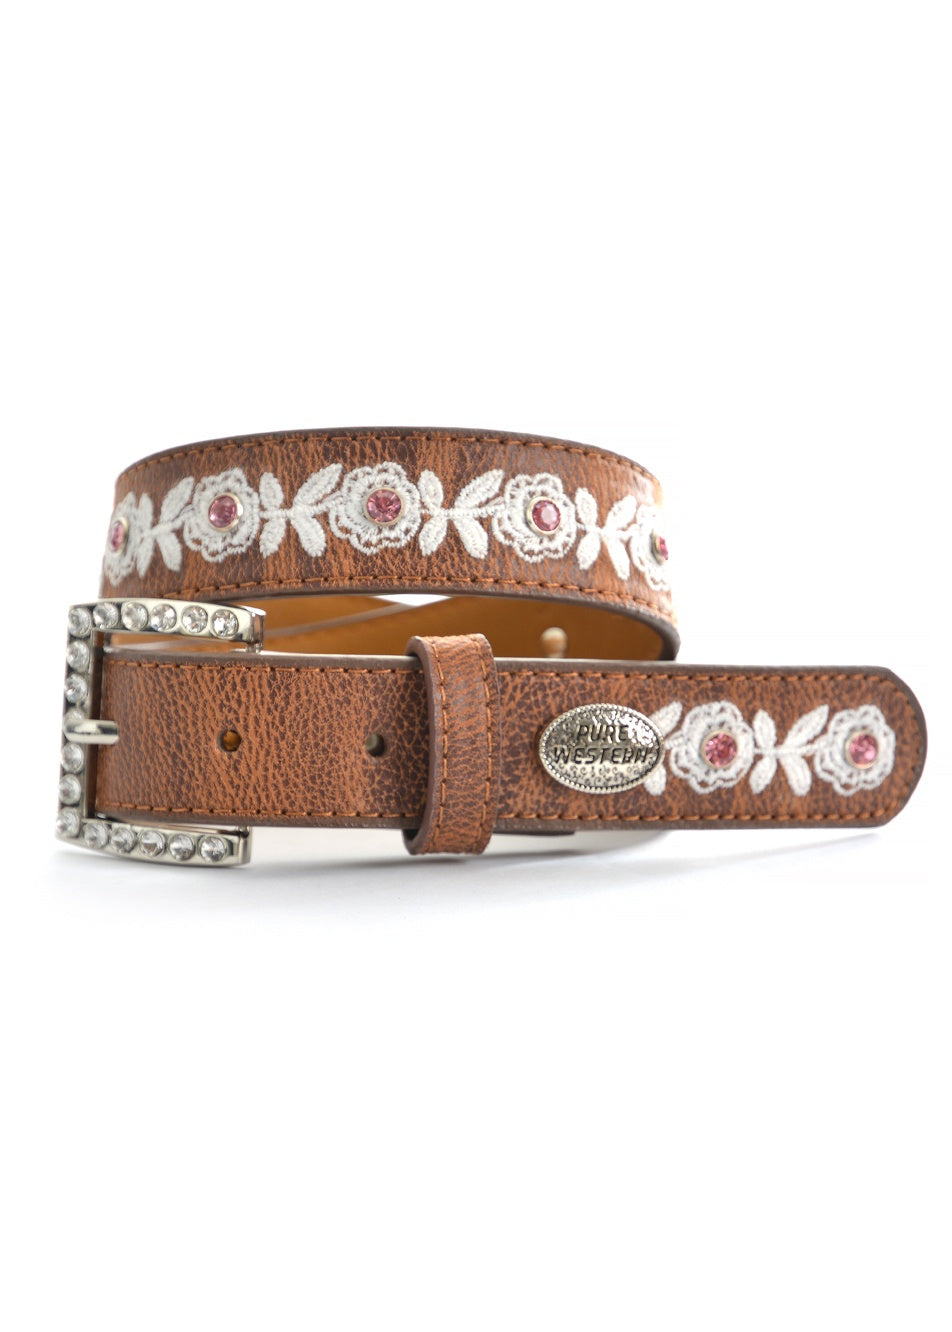 Girl's Pure Western Florence Belt